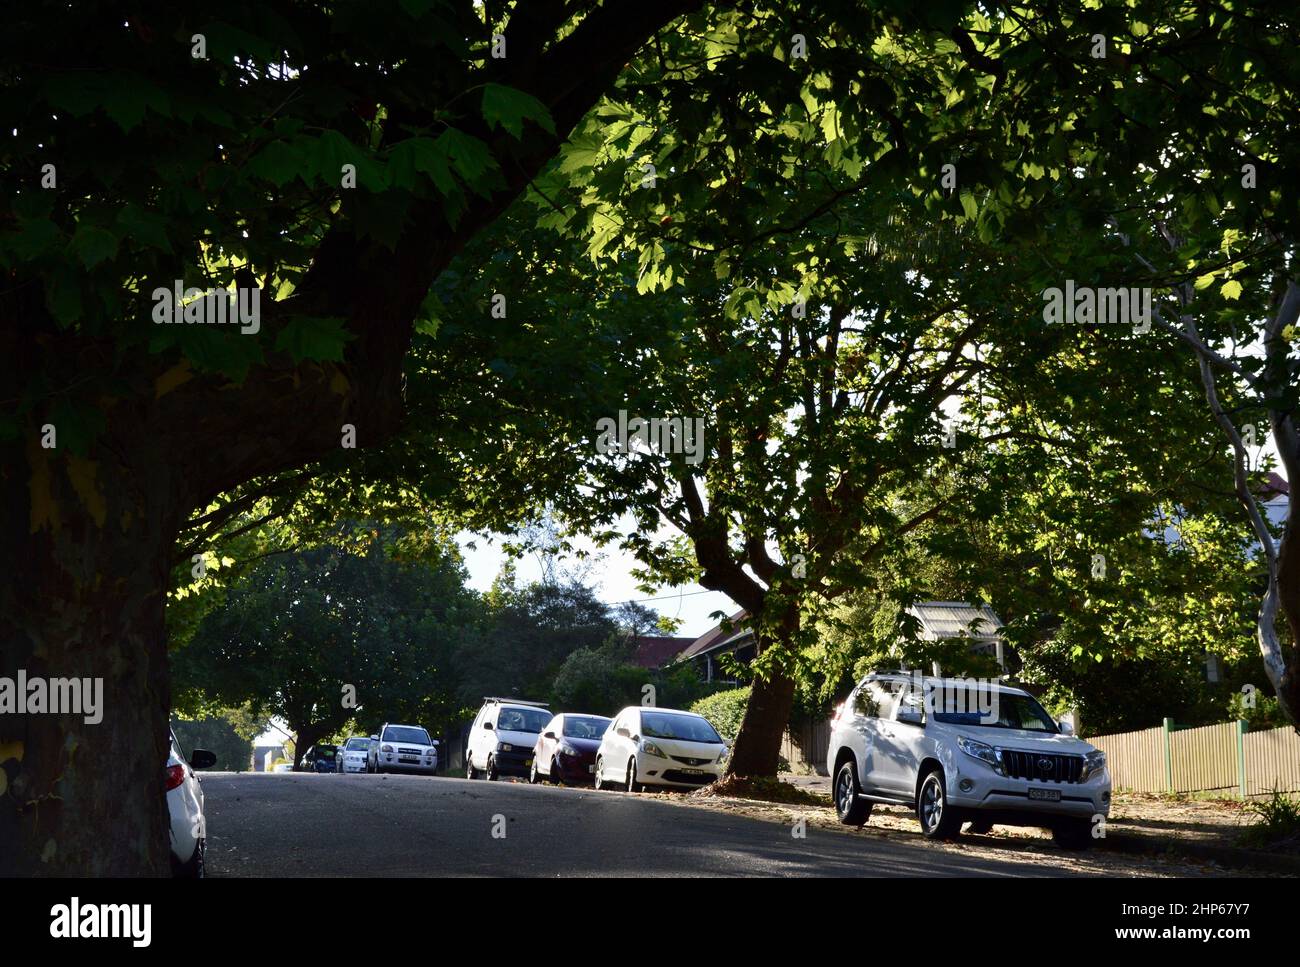 Cars parked in a residential street Stock Photo